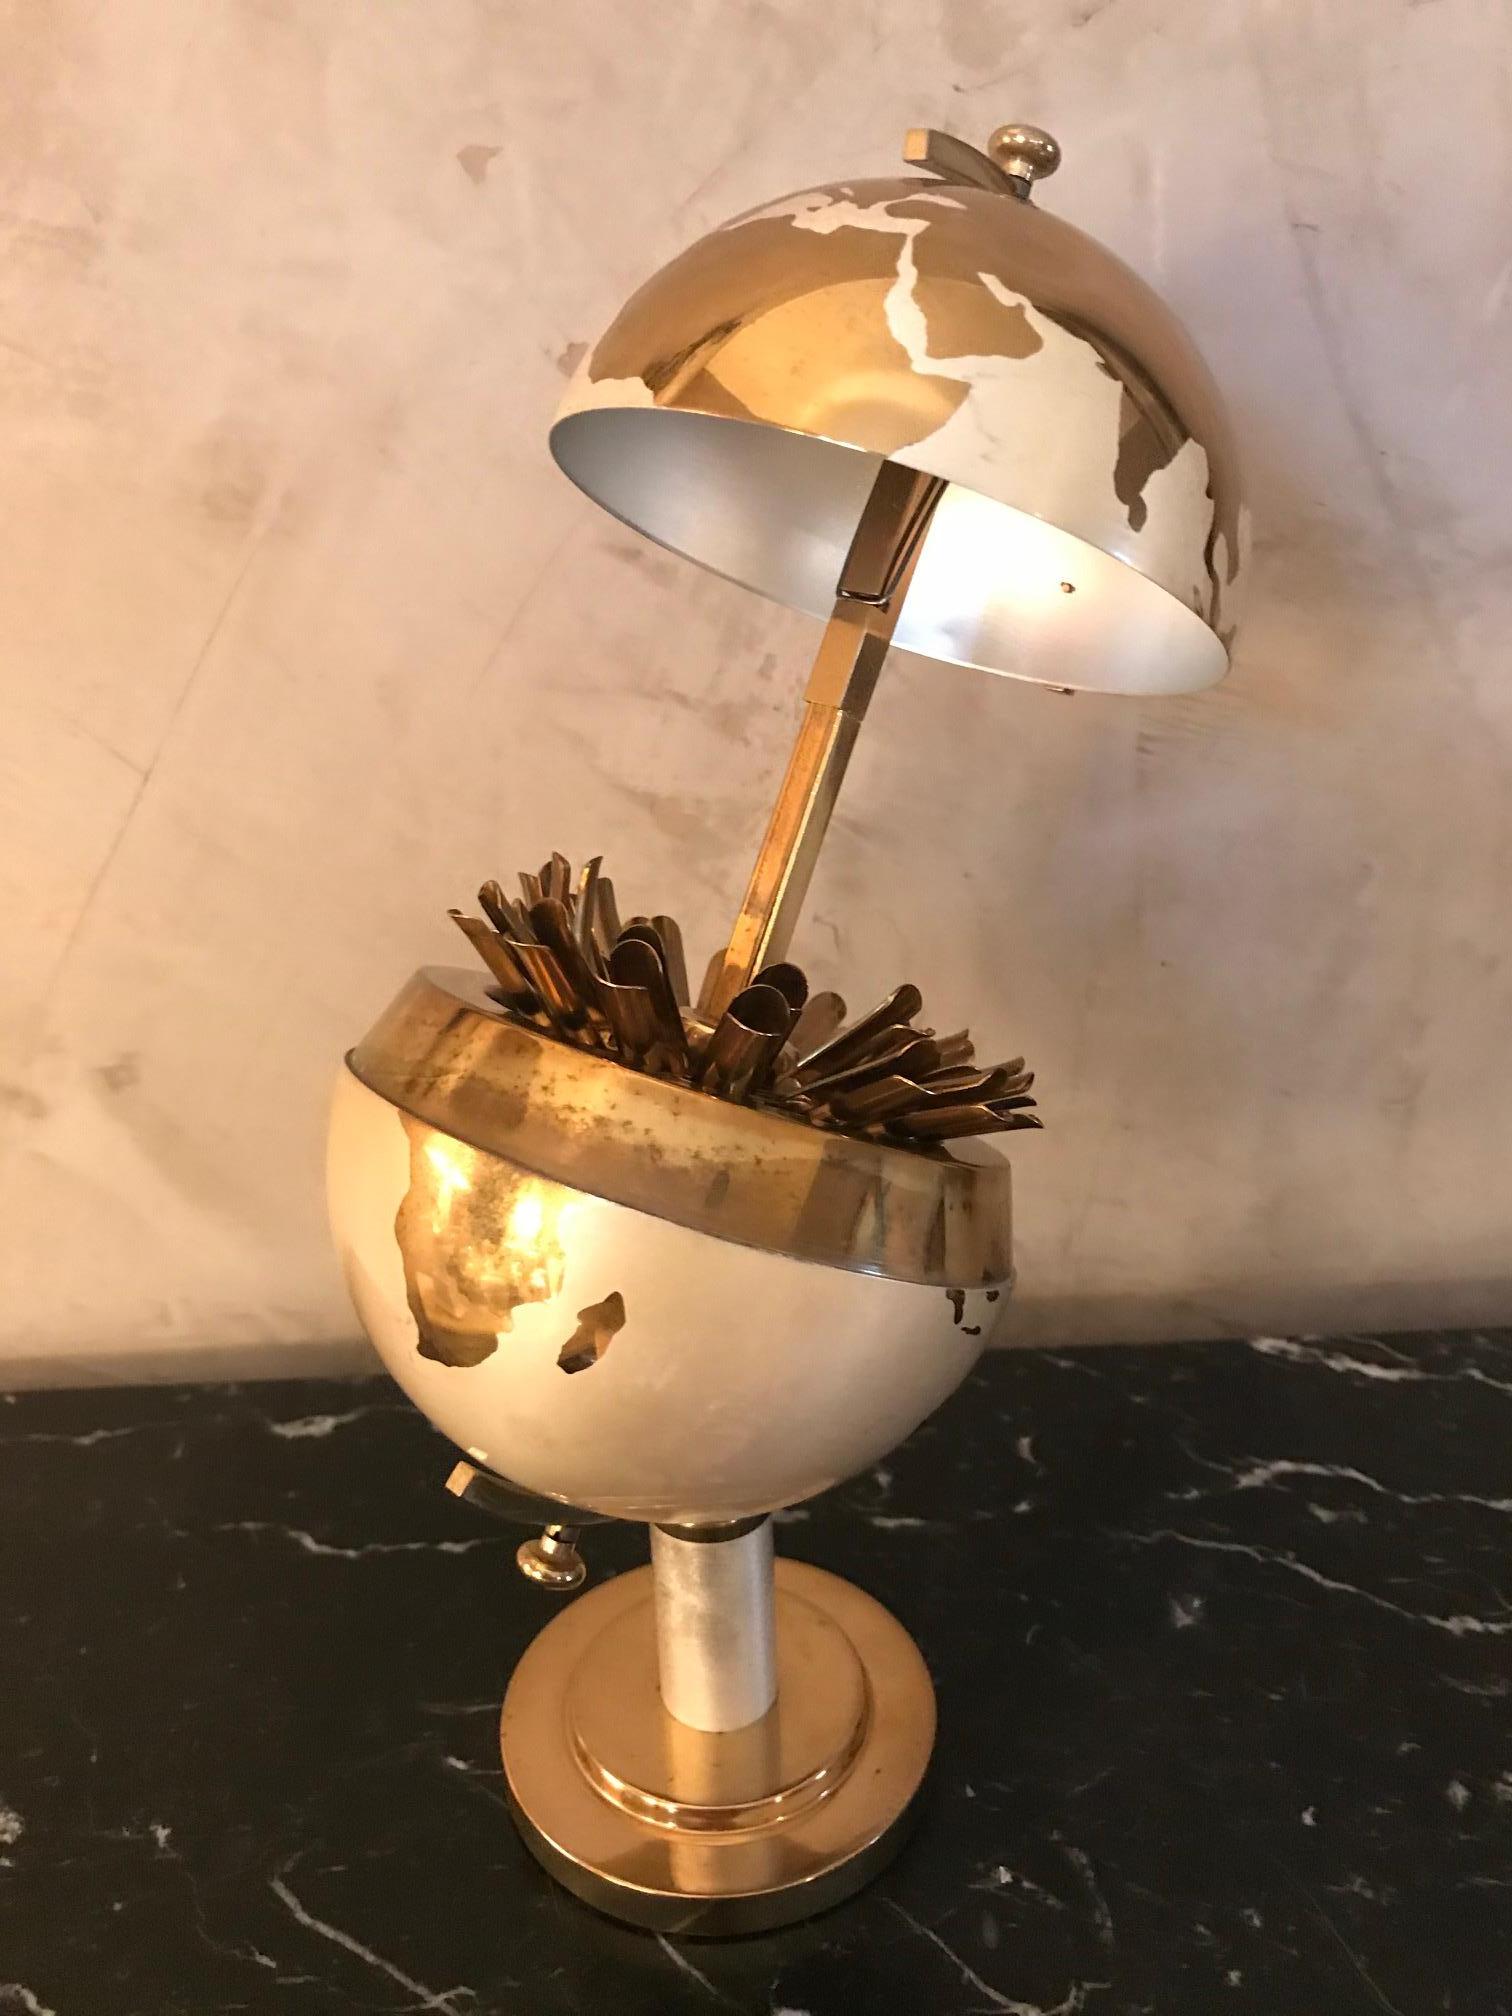 Very nice 20th century French World globe vintage brass cigaret holder from the 1960s.
Opening world globe. 
Good quality and condition.